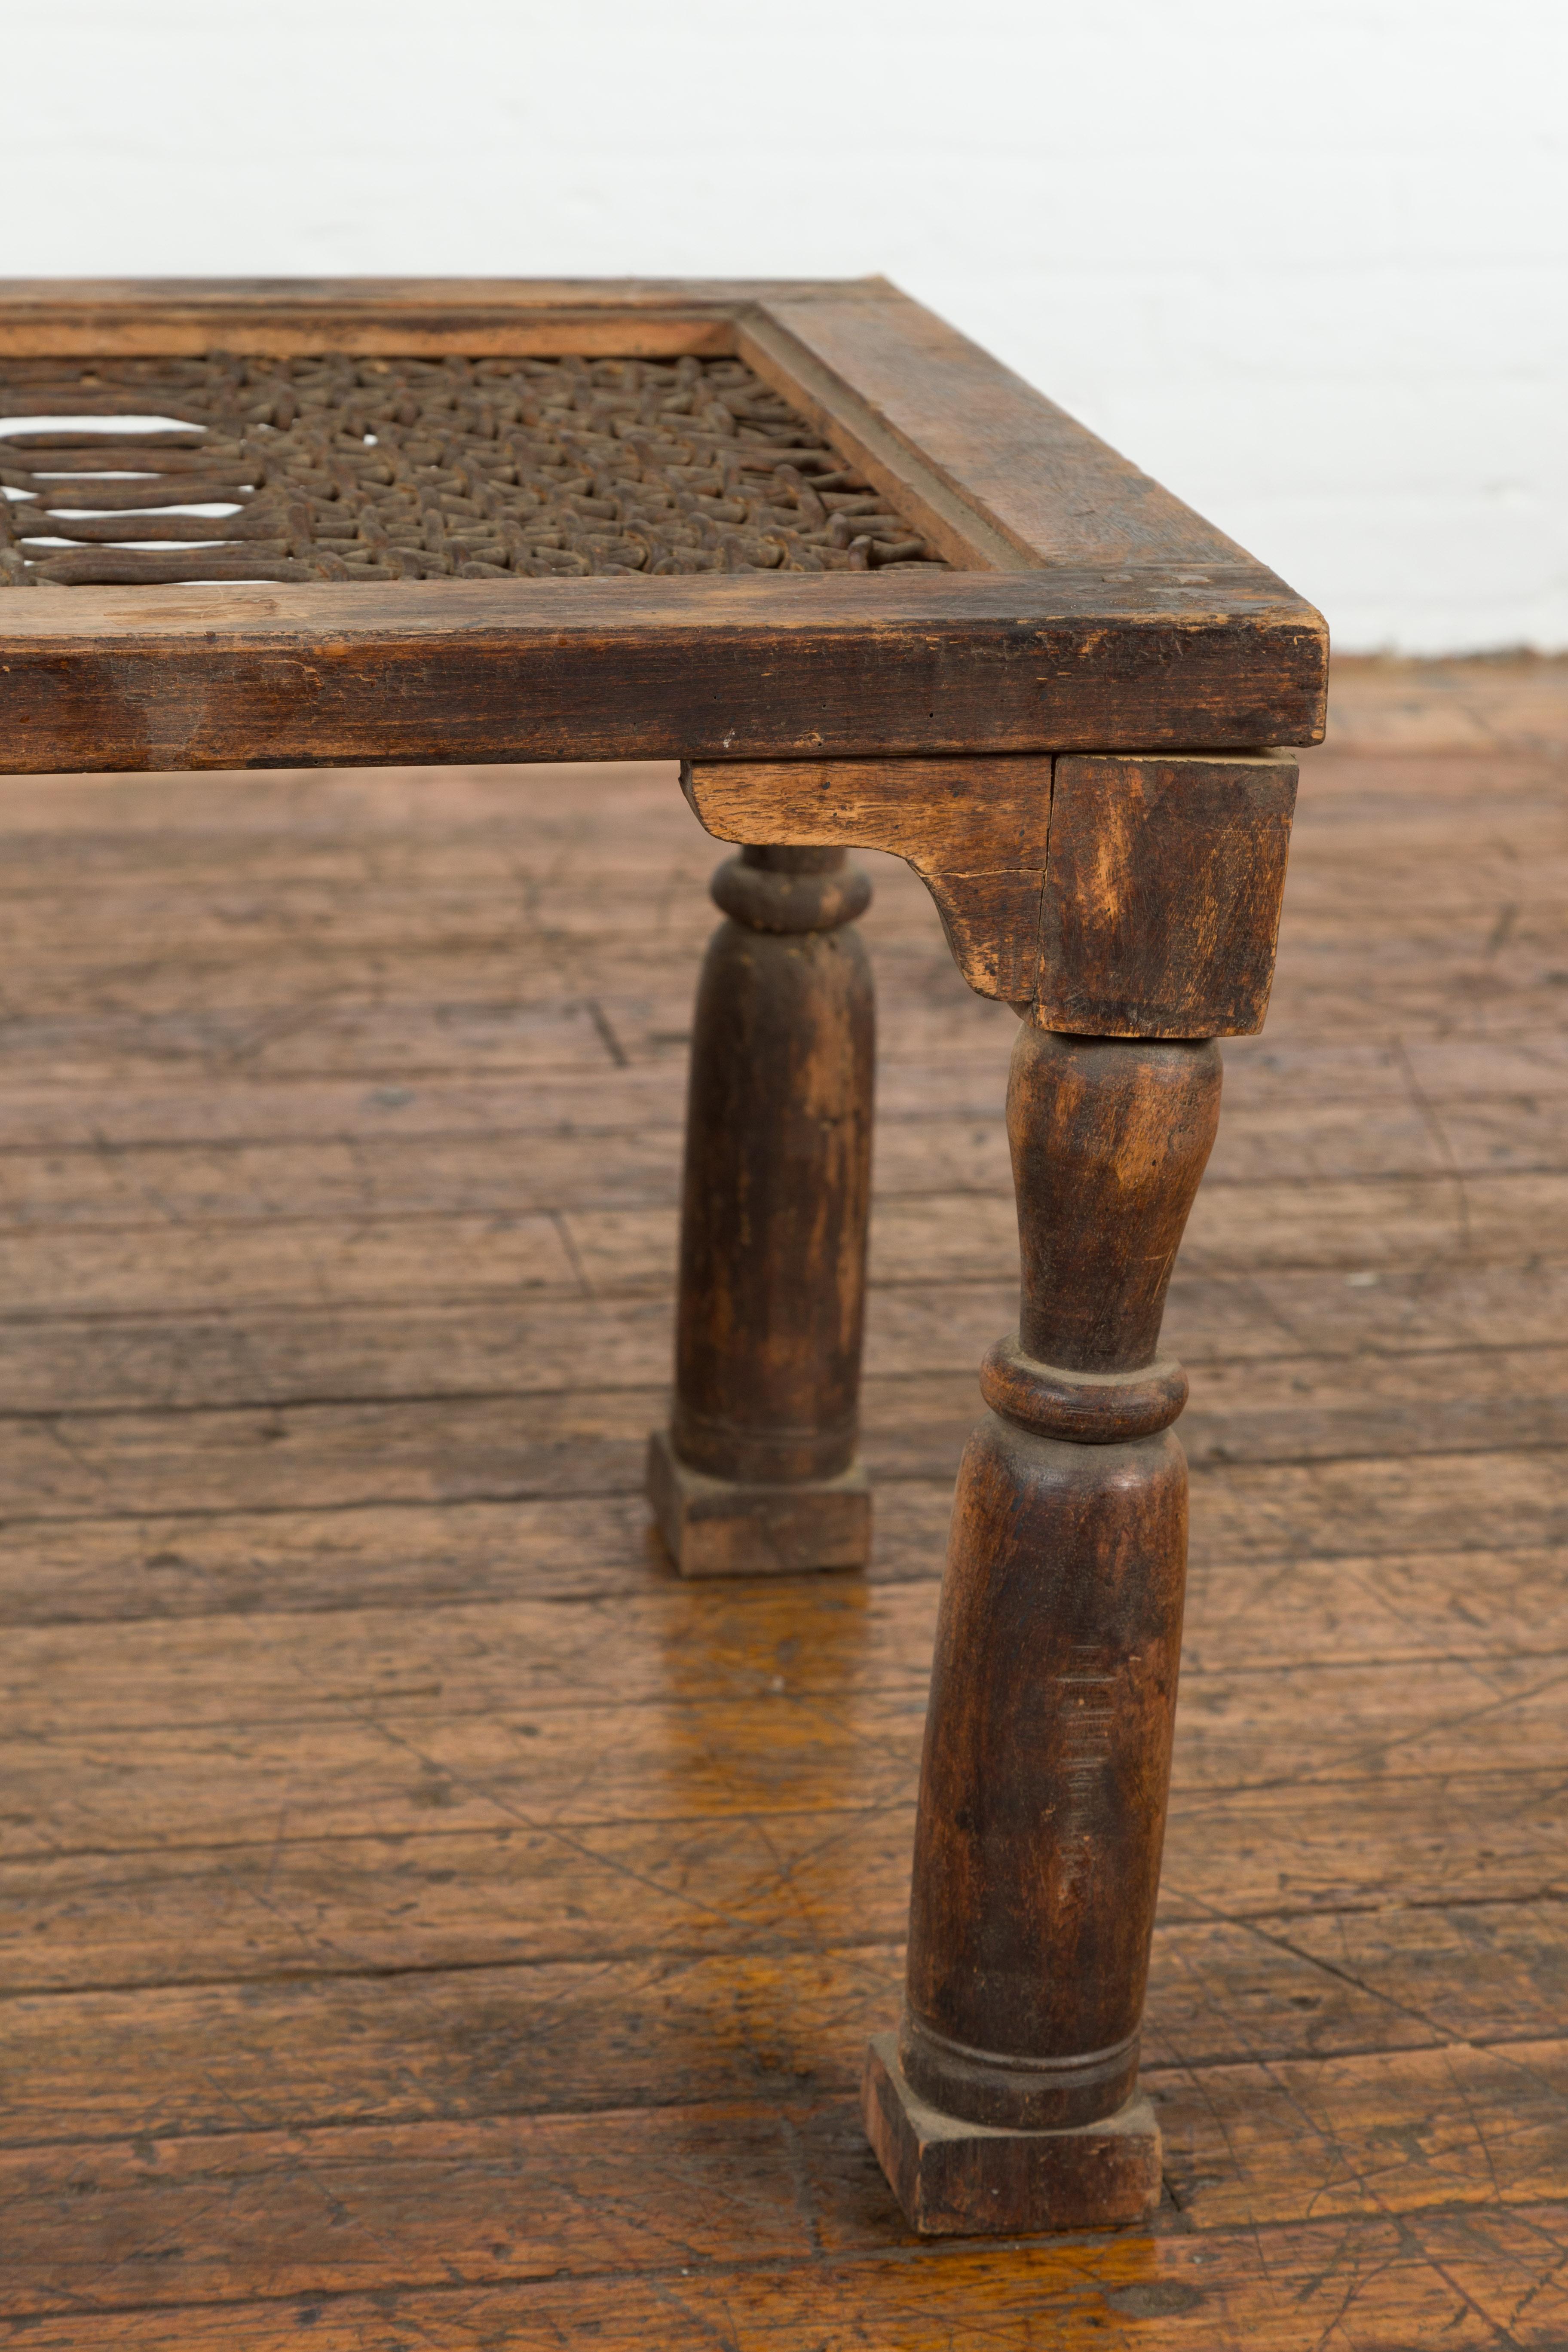 Iron Indian Antique Window Grate Made into a Coffee Table with Turned Baluster Legs For Sale